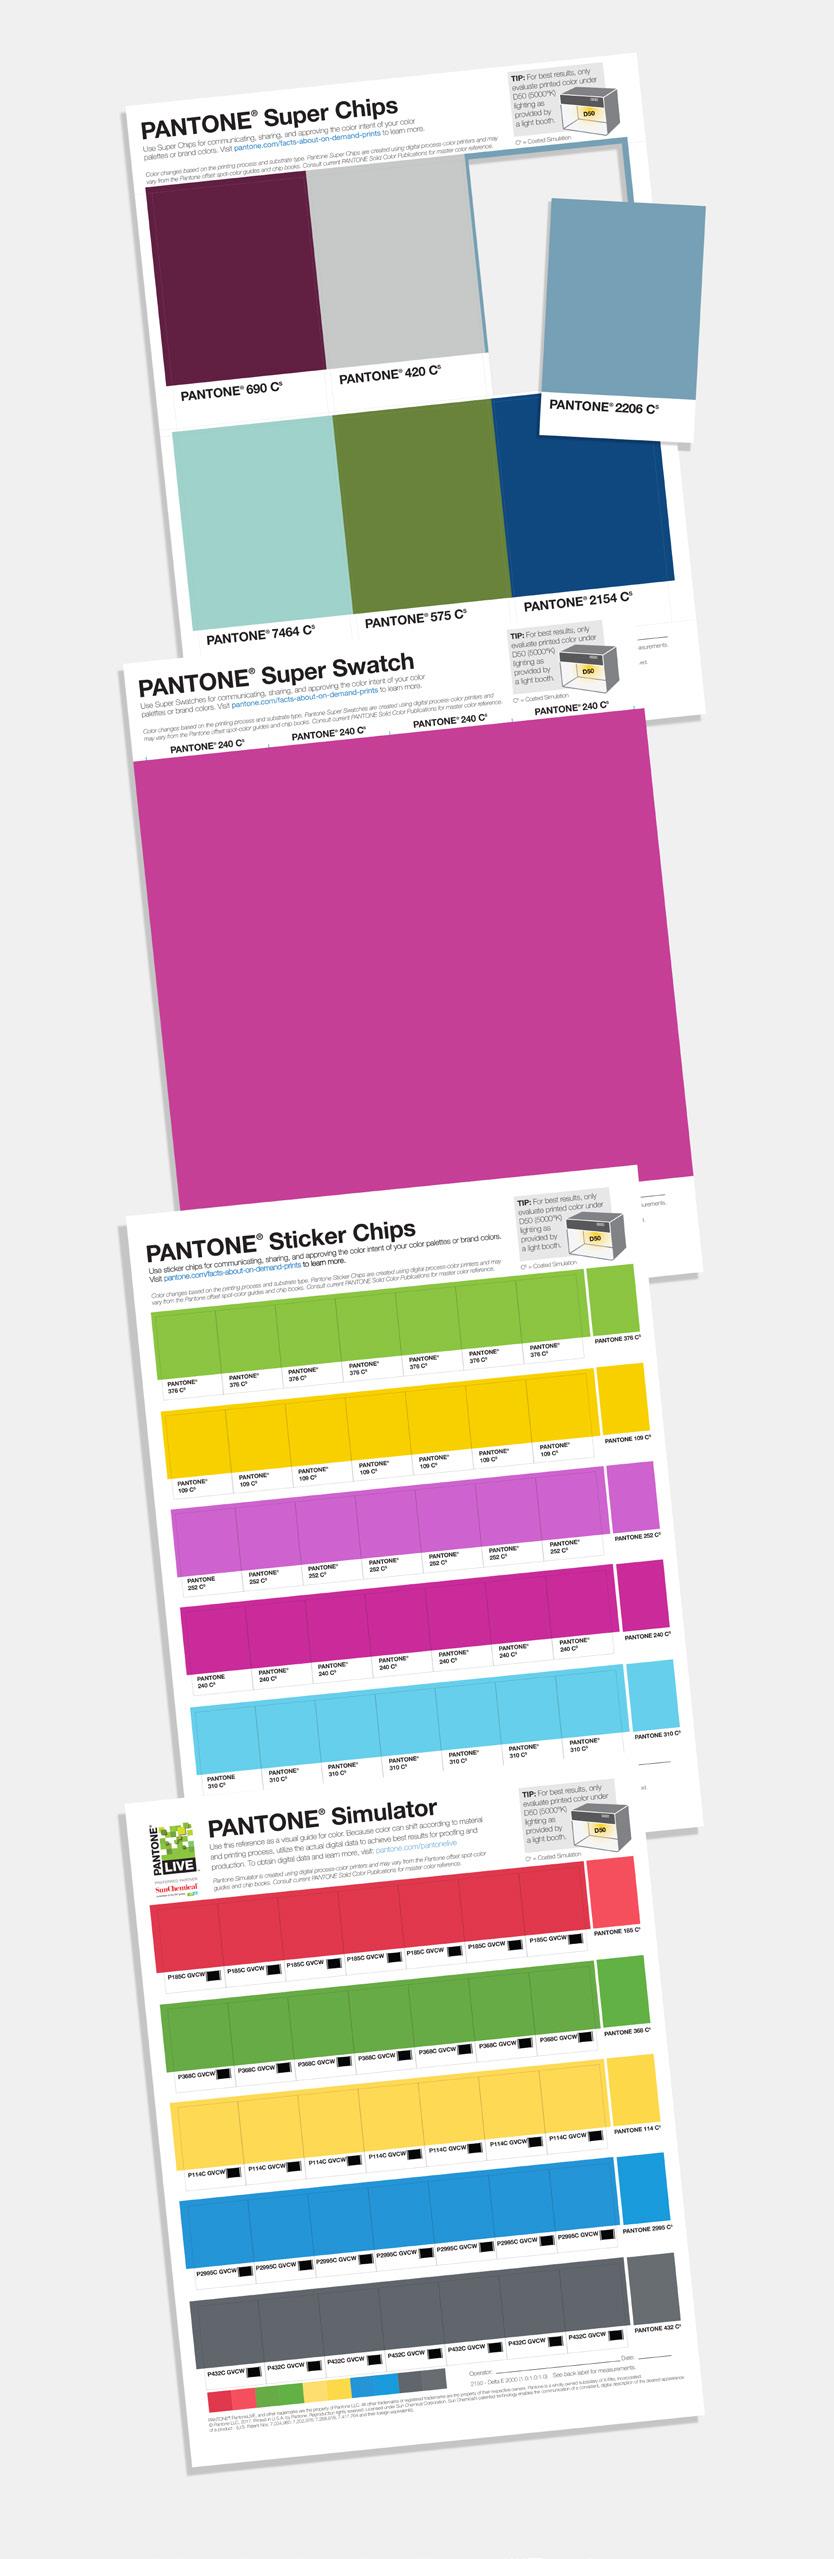 ON-DEMAND PRINTS New Pantone On-Demand Prints provide you with custom prints of just the color or colors you need, available within 24-48 hours. A 